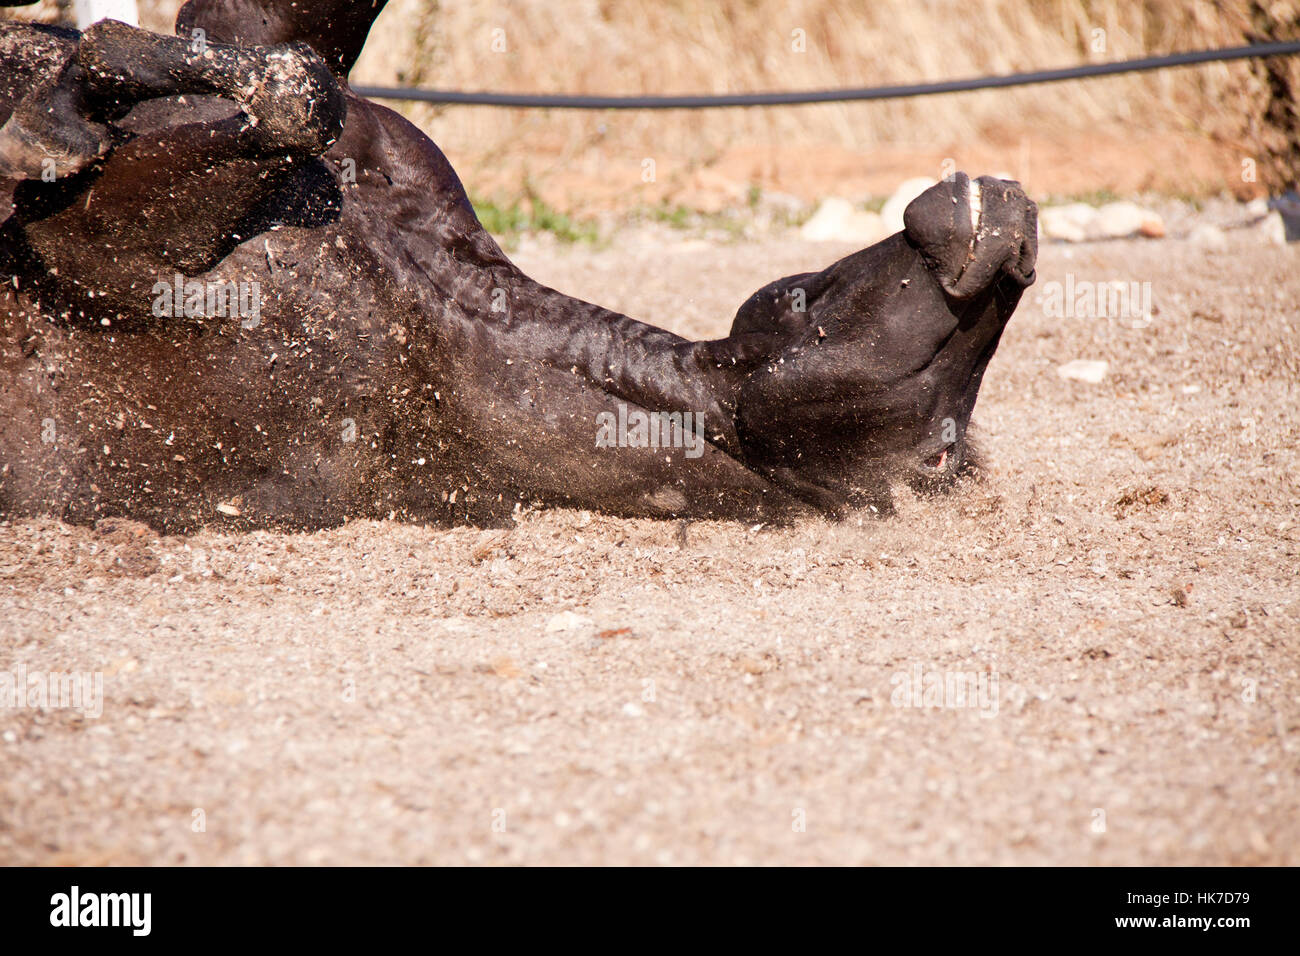 ride, horse, animals, summer, summerly, horses, strength, force, outdoors, Stock Photo